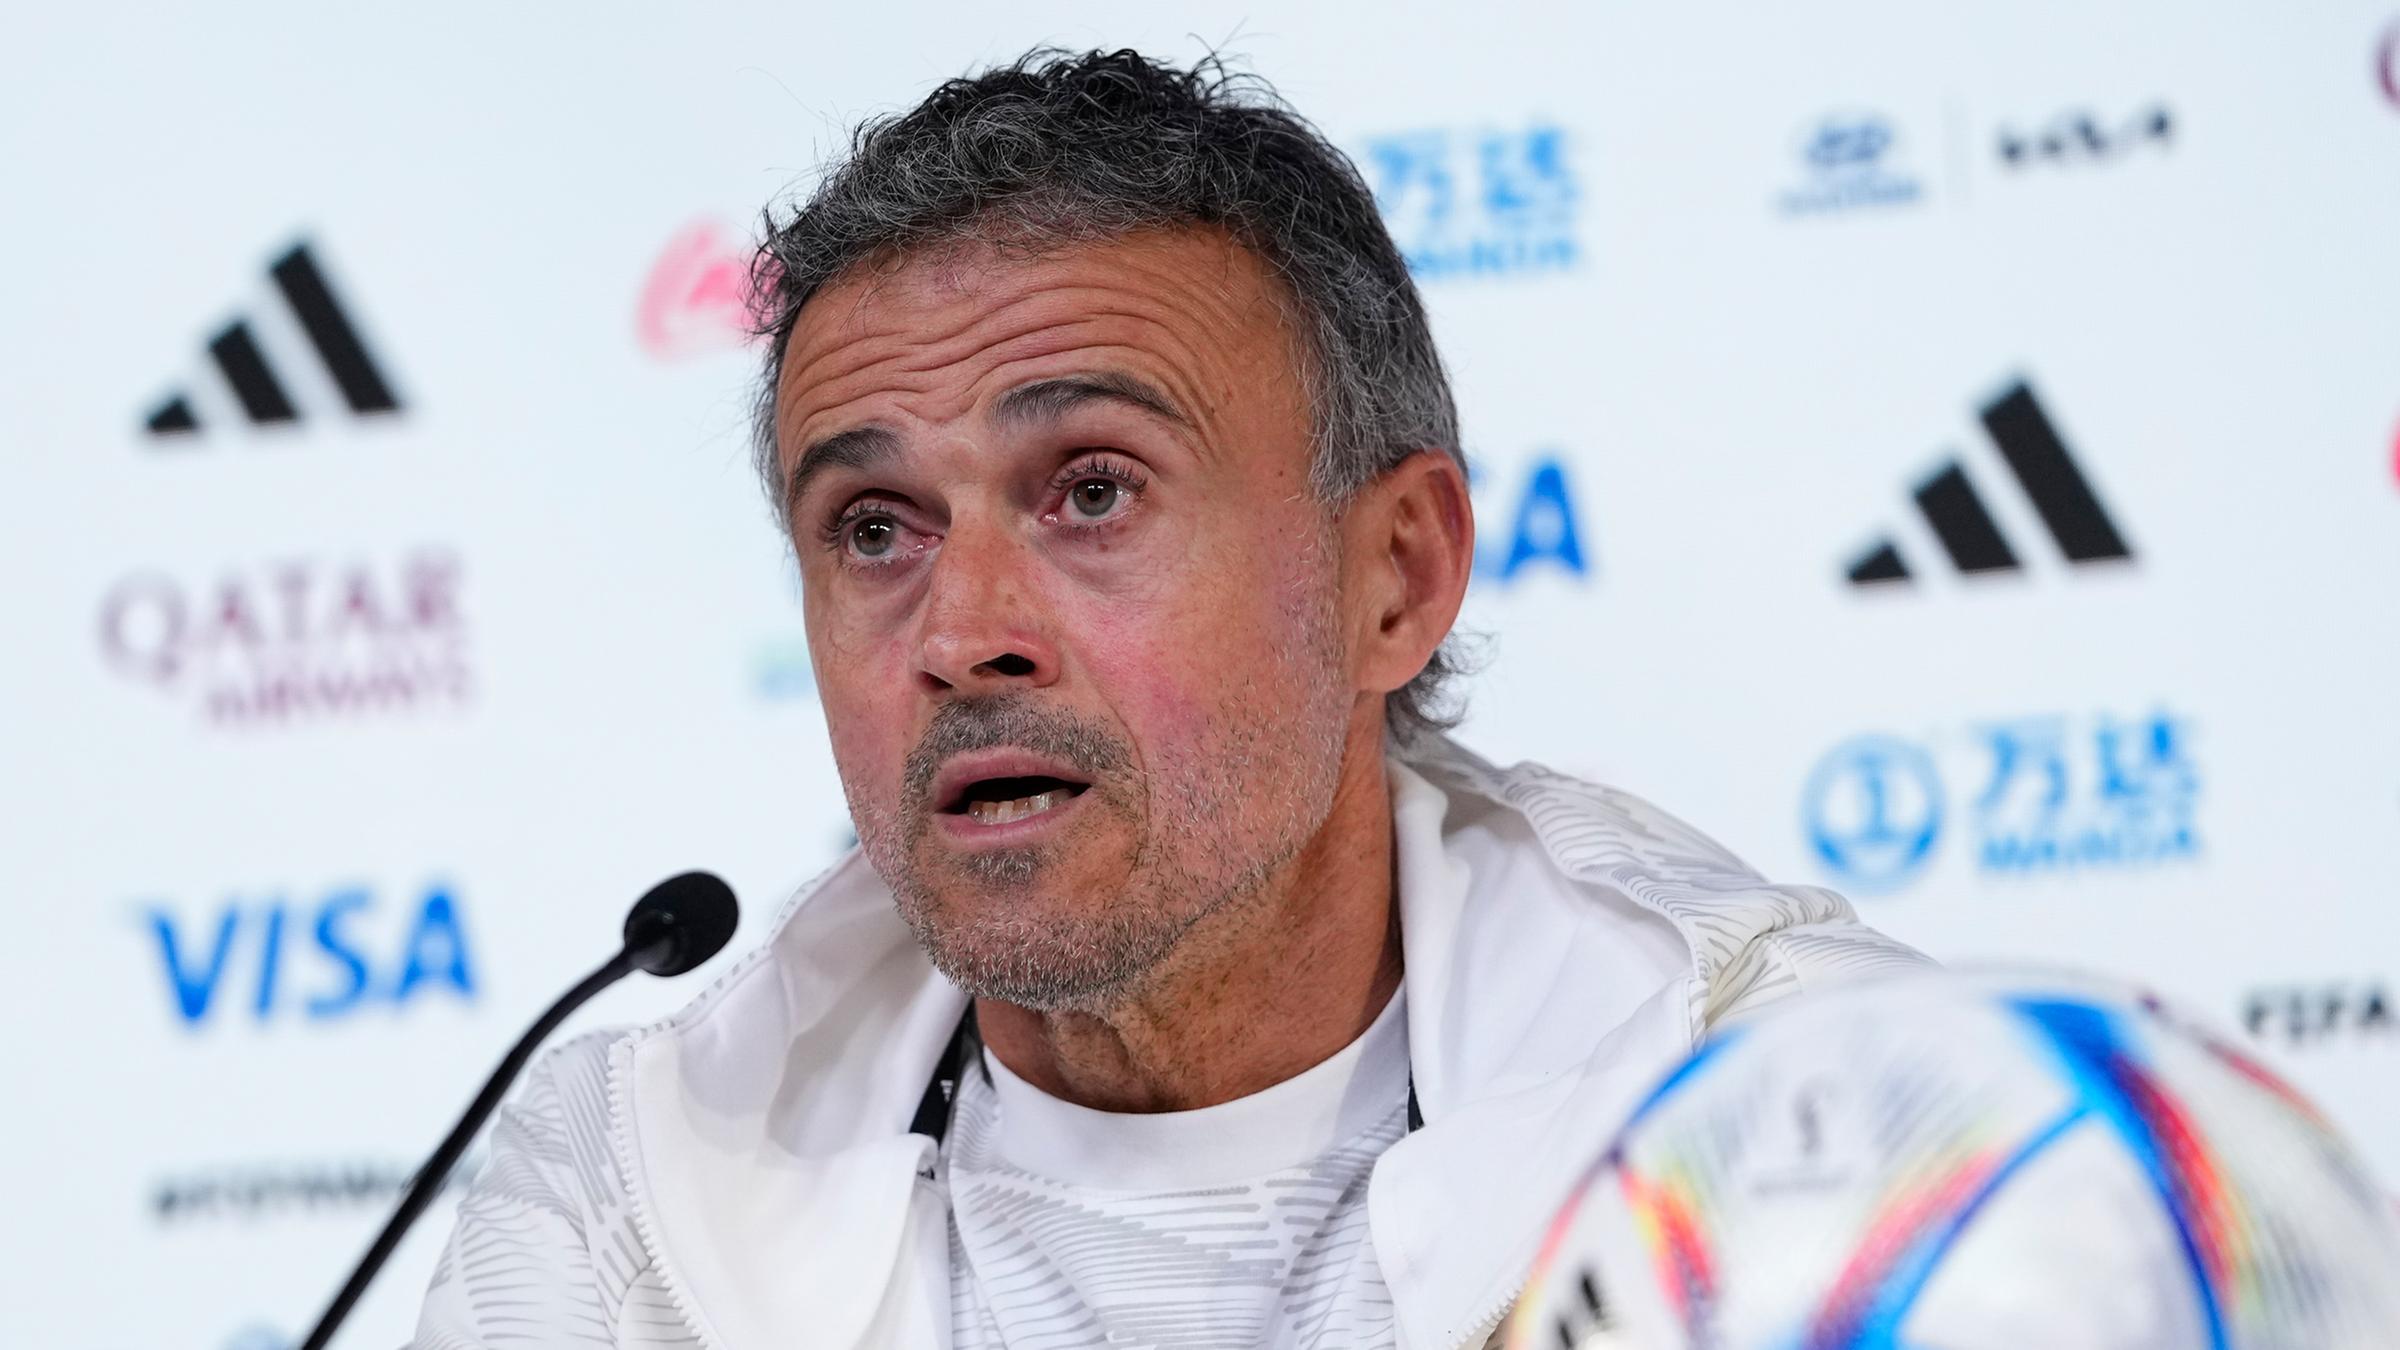 26.11.2022, Spain national team coach Luis Enrique at a press conference in Doha, Qatar.  Spain face Germany on 27 November.